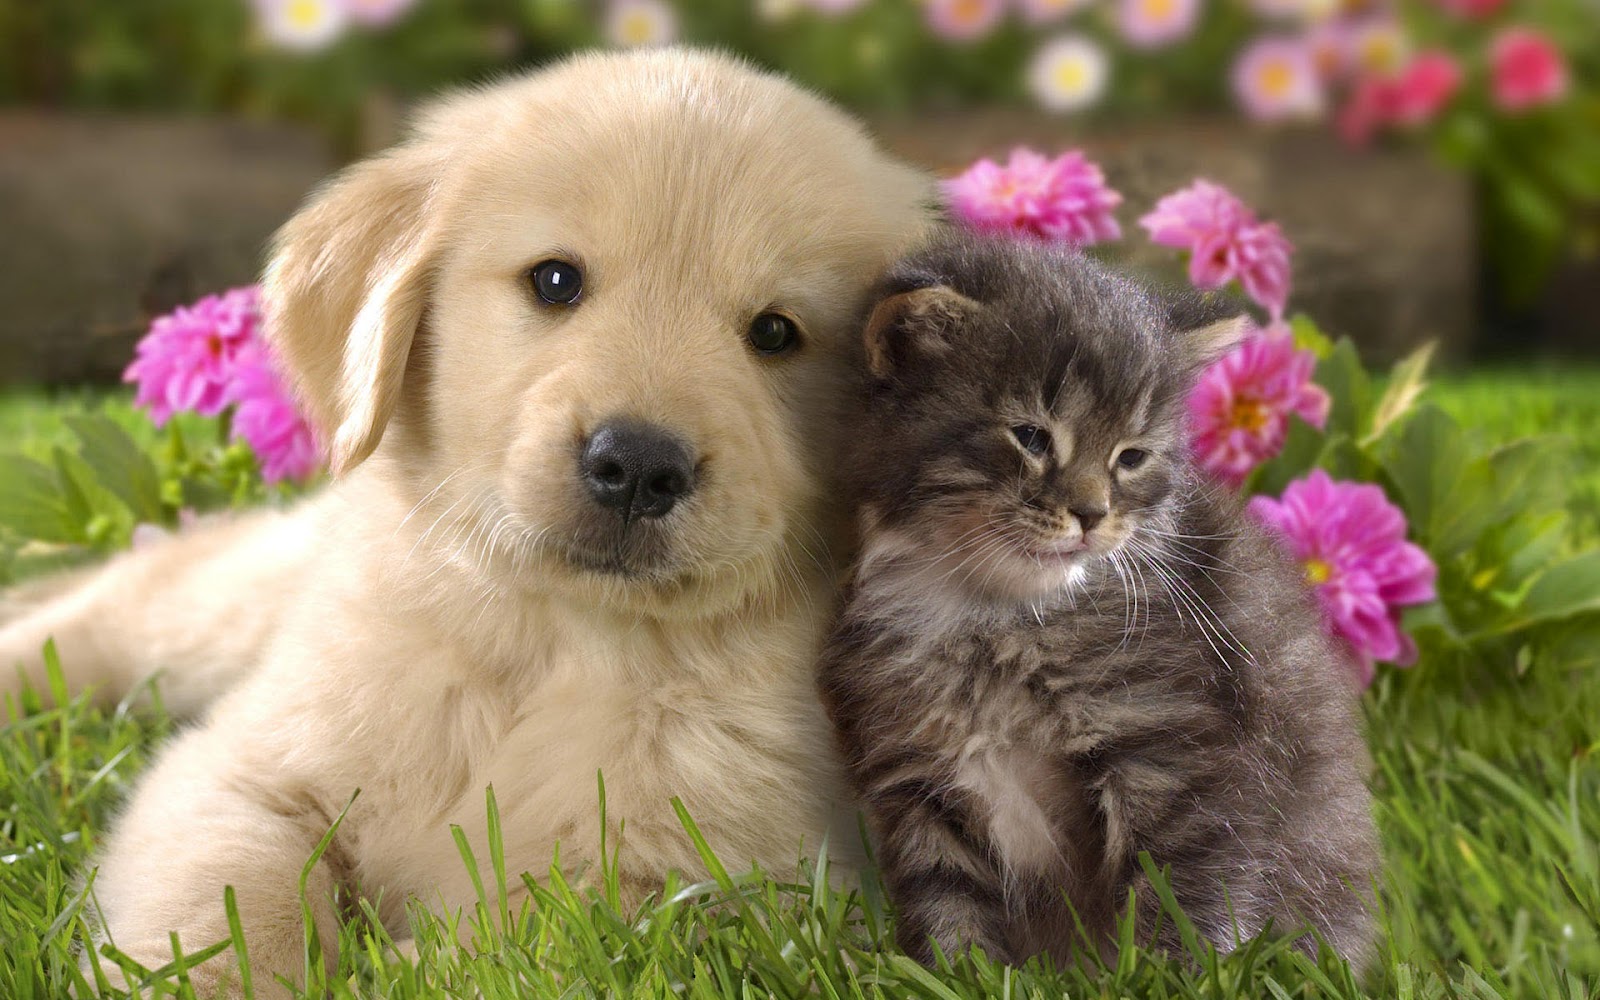 Cute Baby Cats And Dogs - wallpaper.